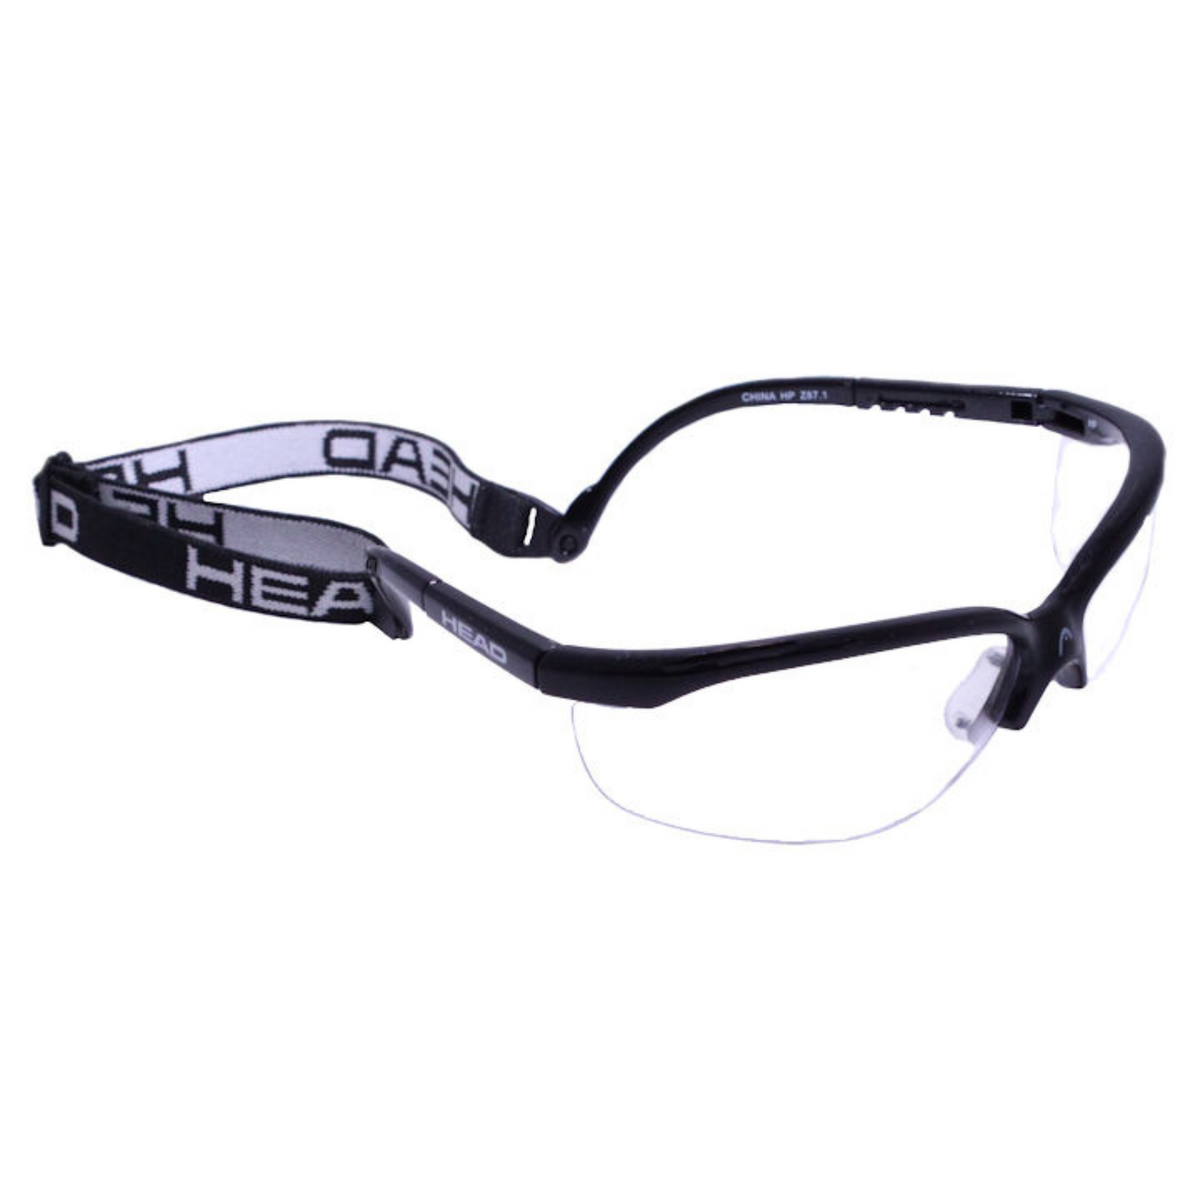 Racquetball goggles from head for racquet sports